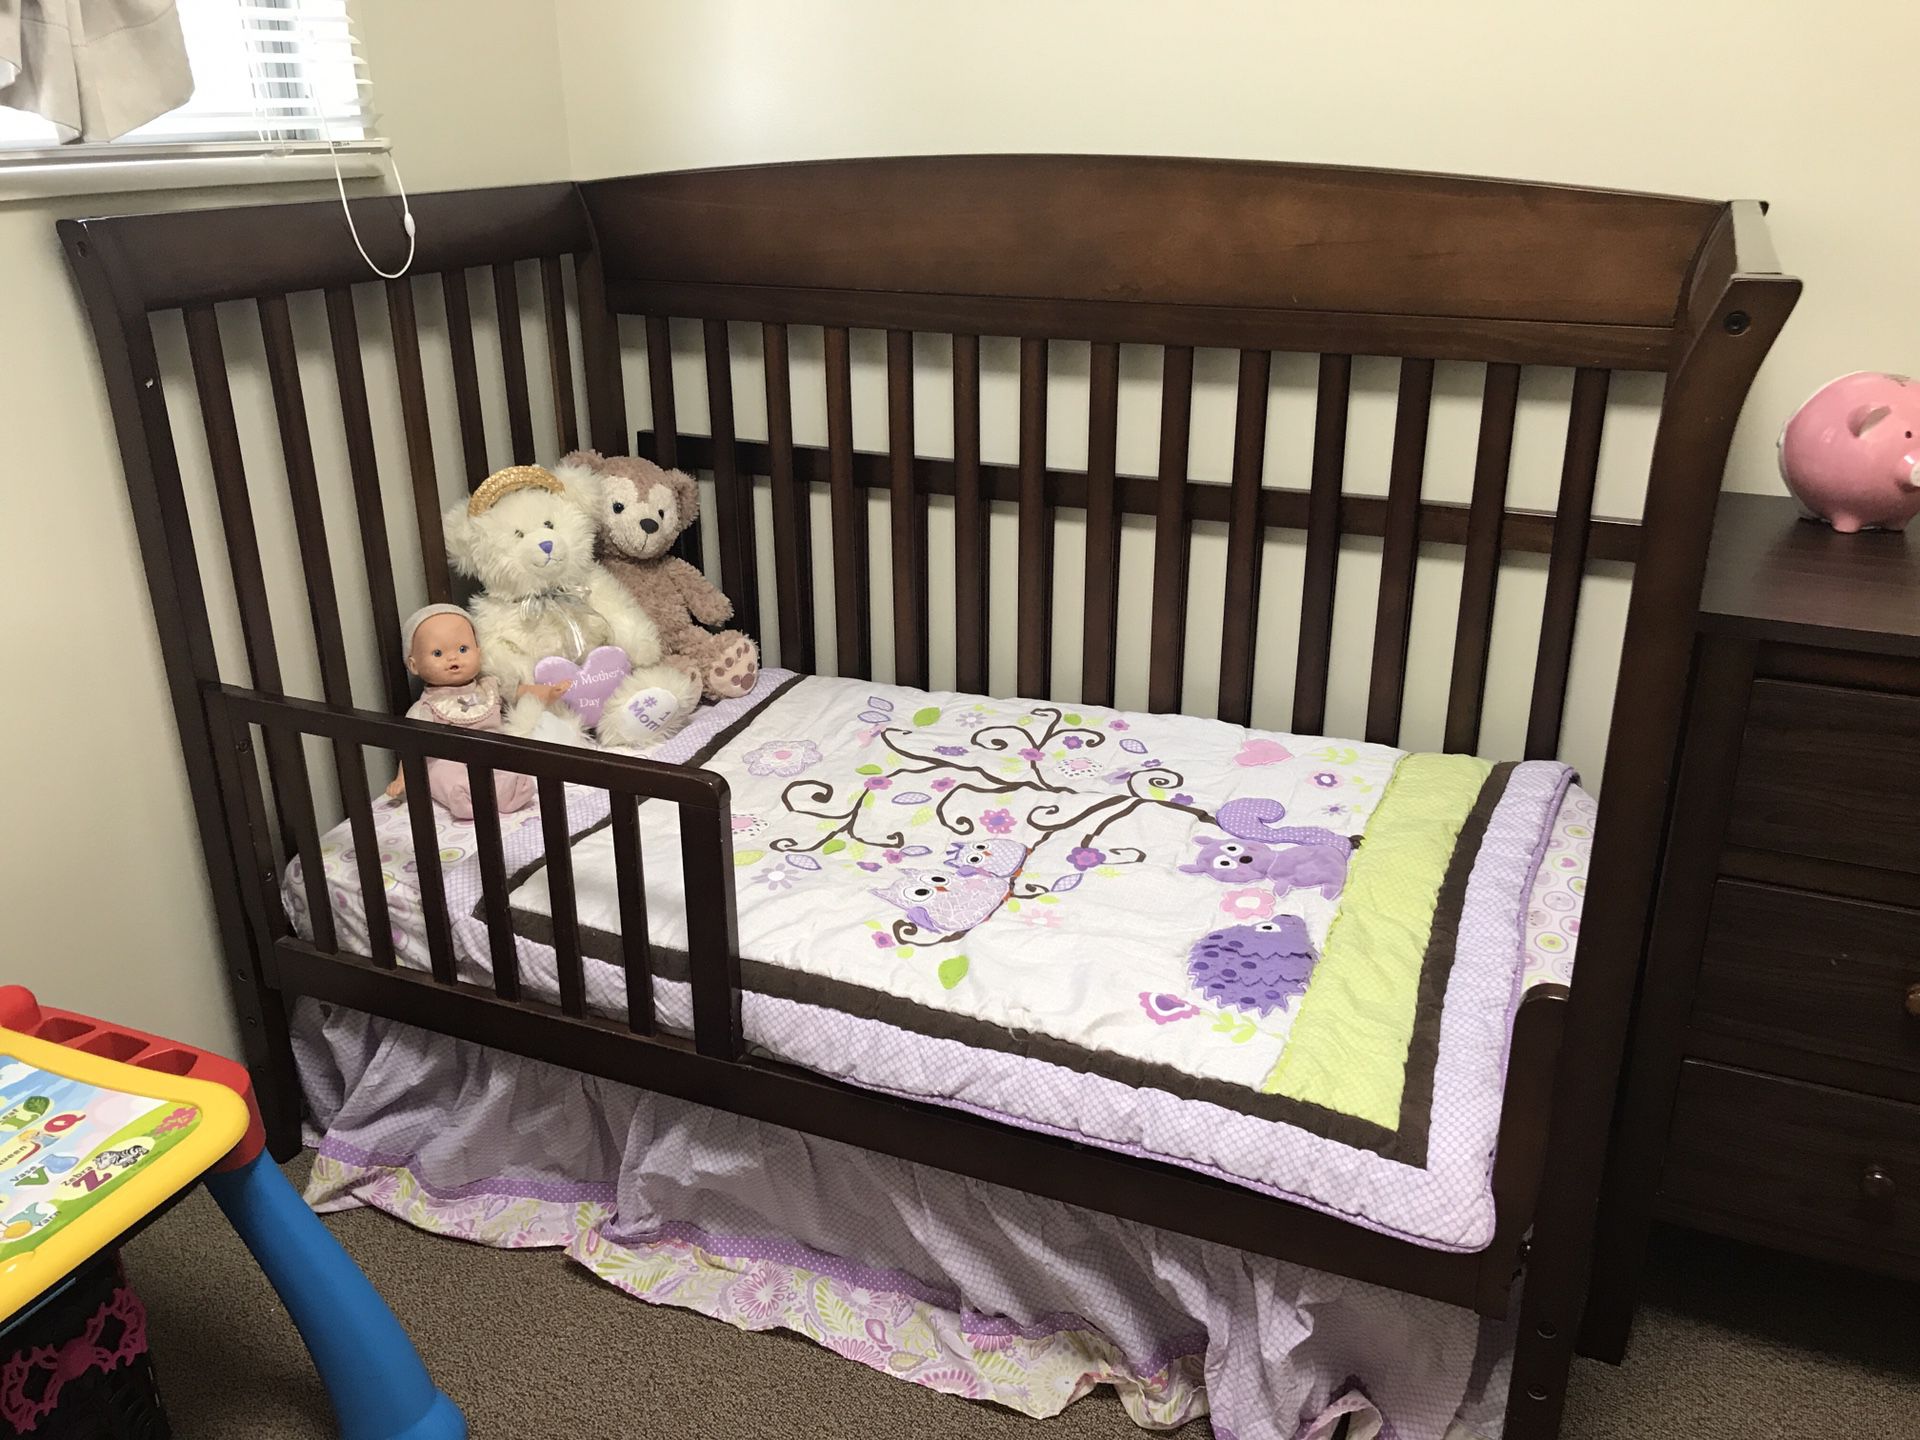 Baby bed, dresser, and changing table.